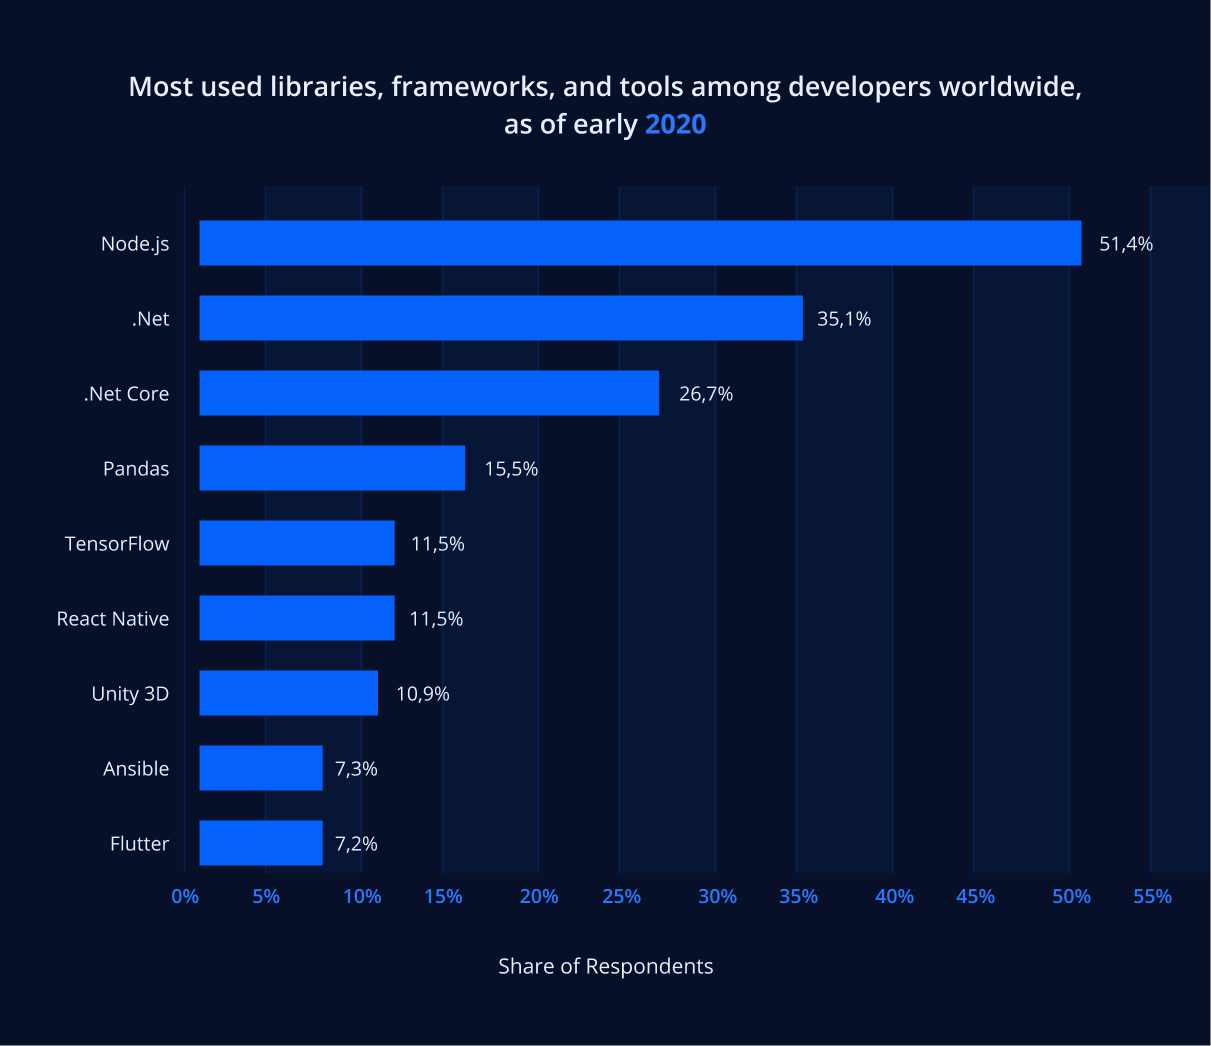 Most used libraries, frameworks, and tools in 2020